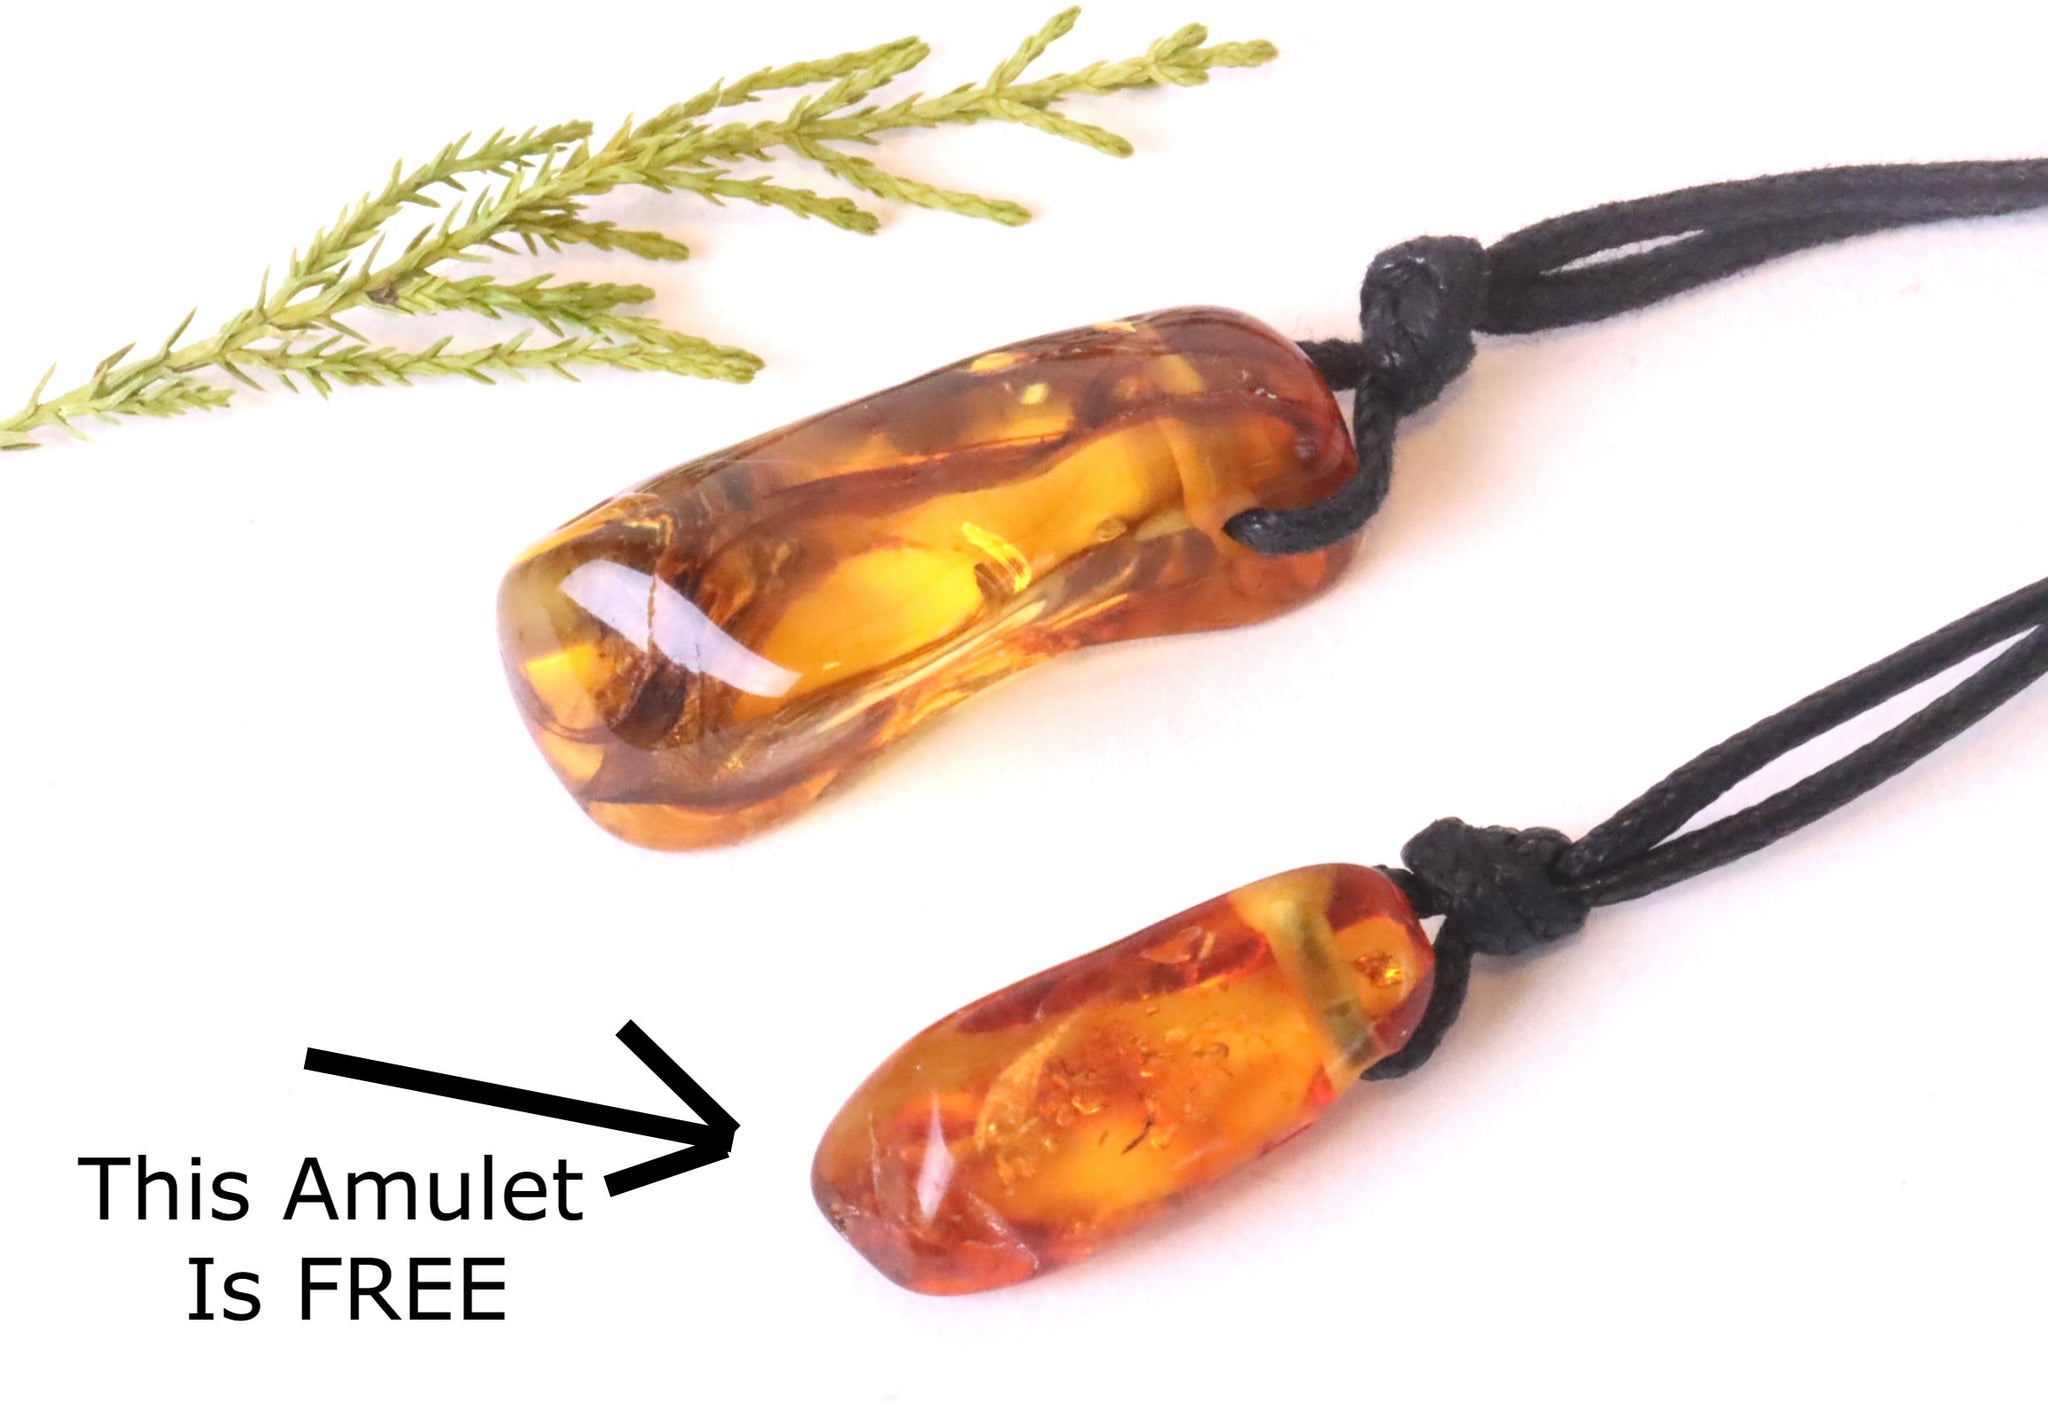 Natural Handmade Baltic Amber Amulet And Get 2nd FREE